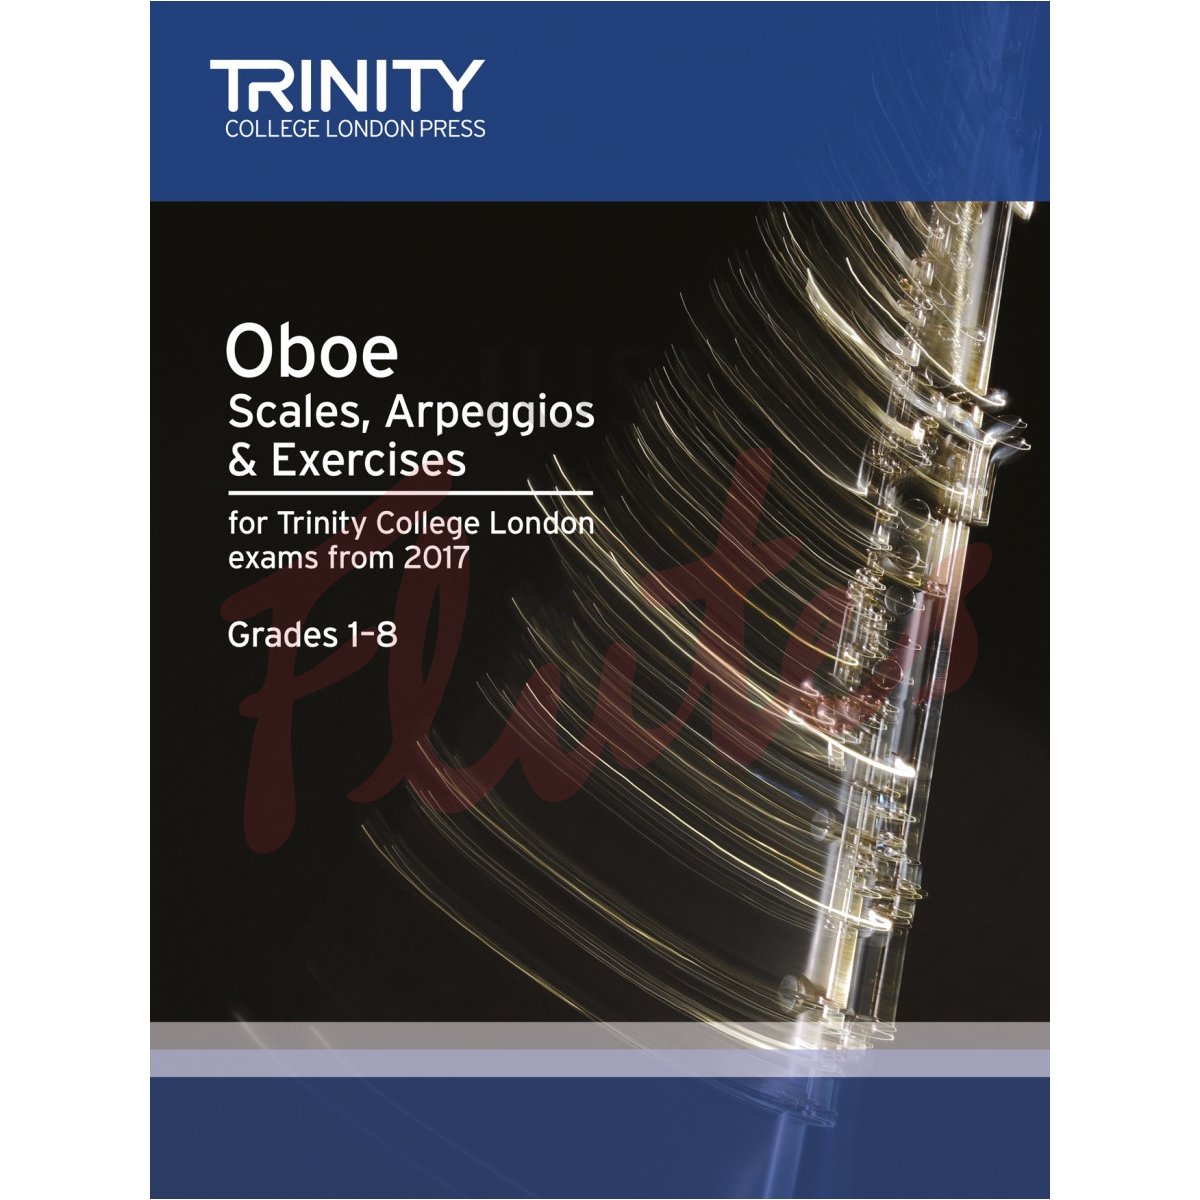 Scales, Arpeggios &amp; Exercises [Oboe] Grades 1-8 from 2017